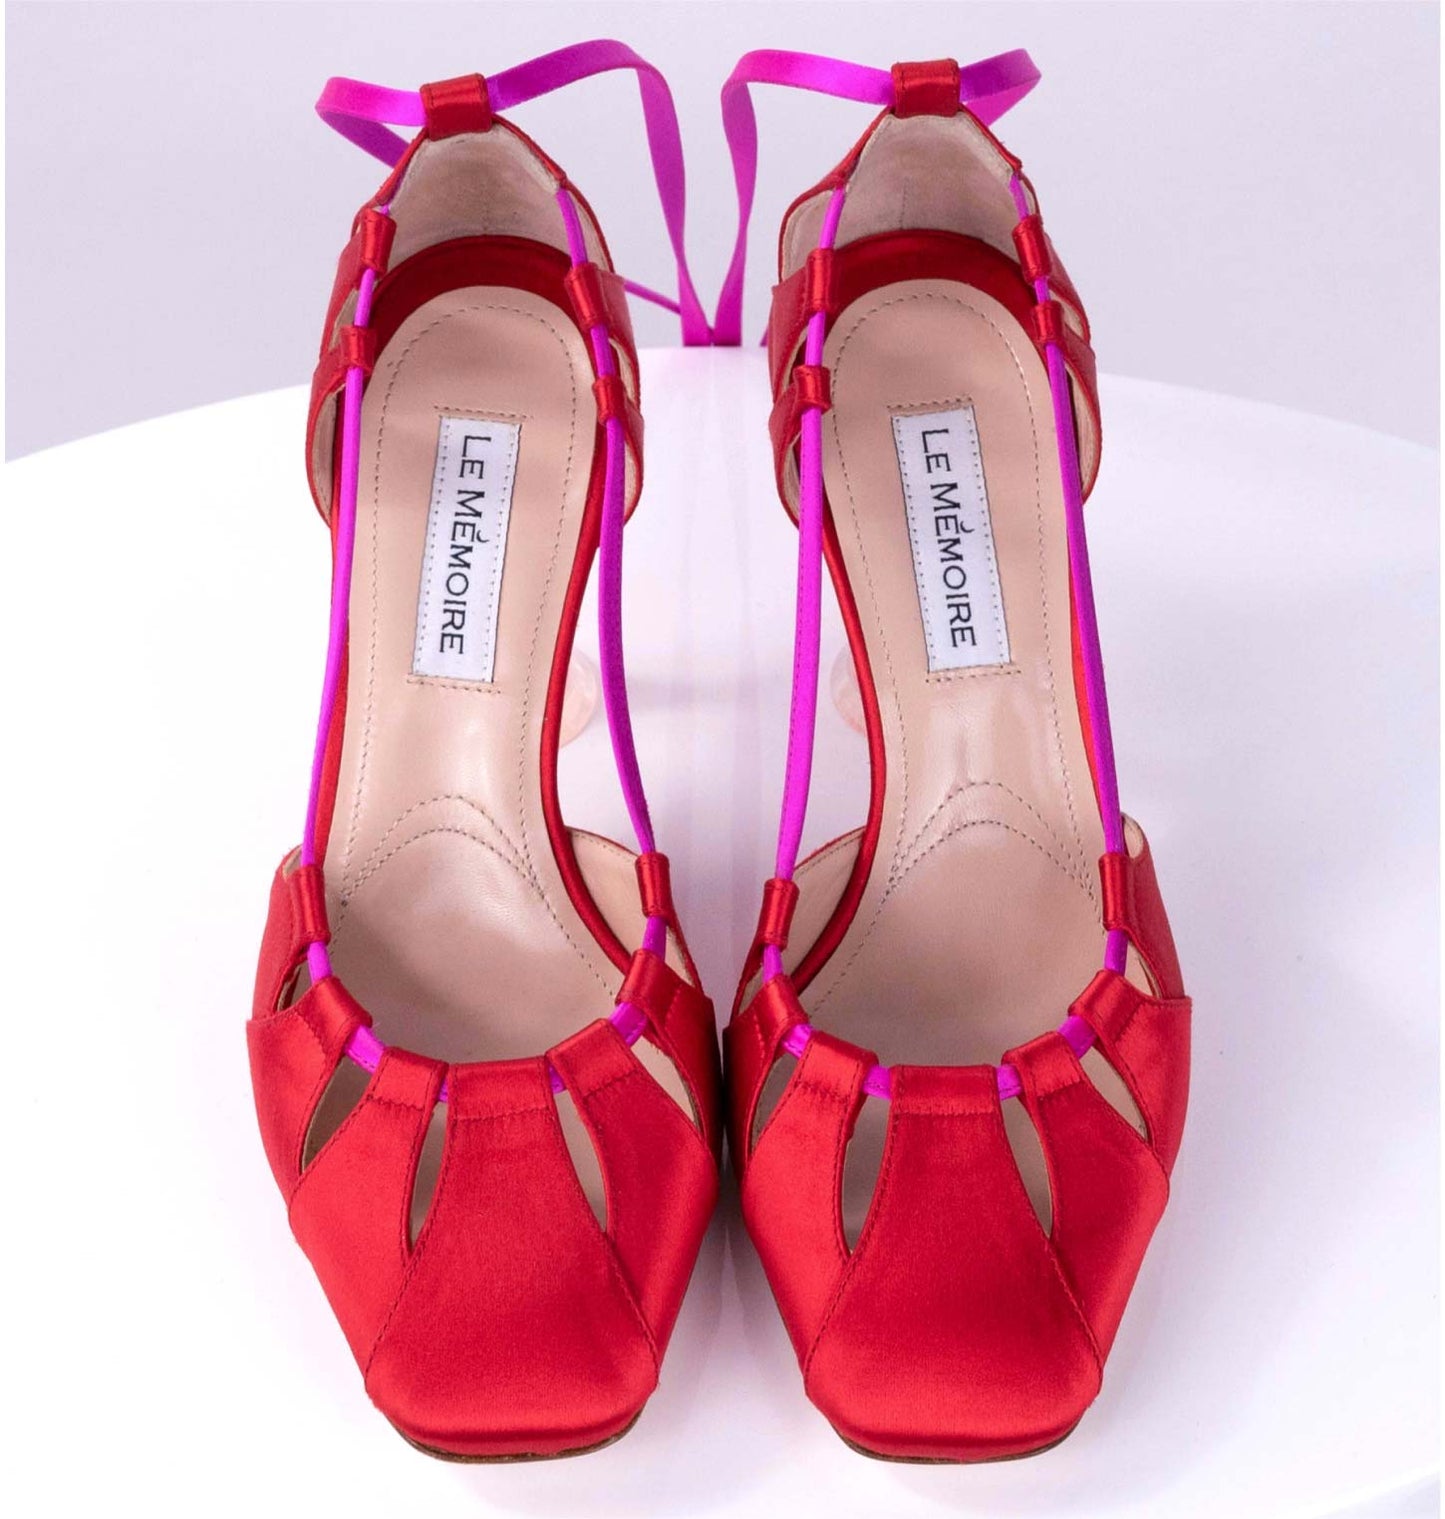 "ANTARES" Red+Fuchsia - Satin Laced Up Pump